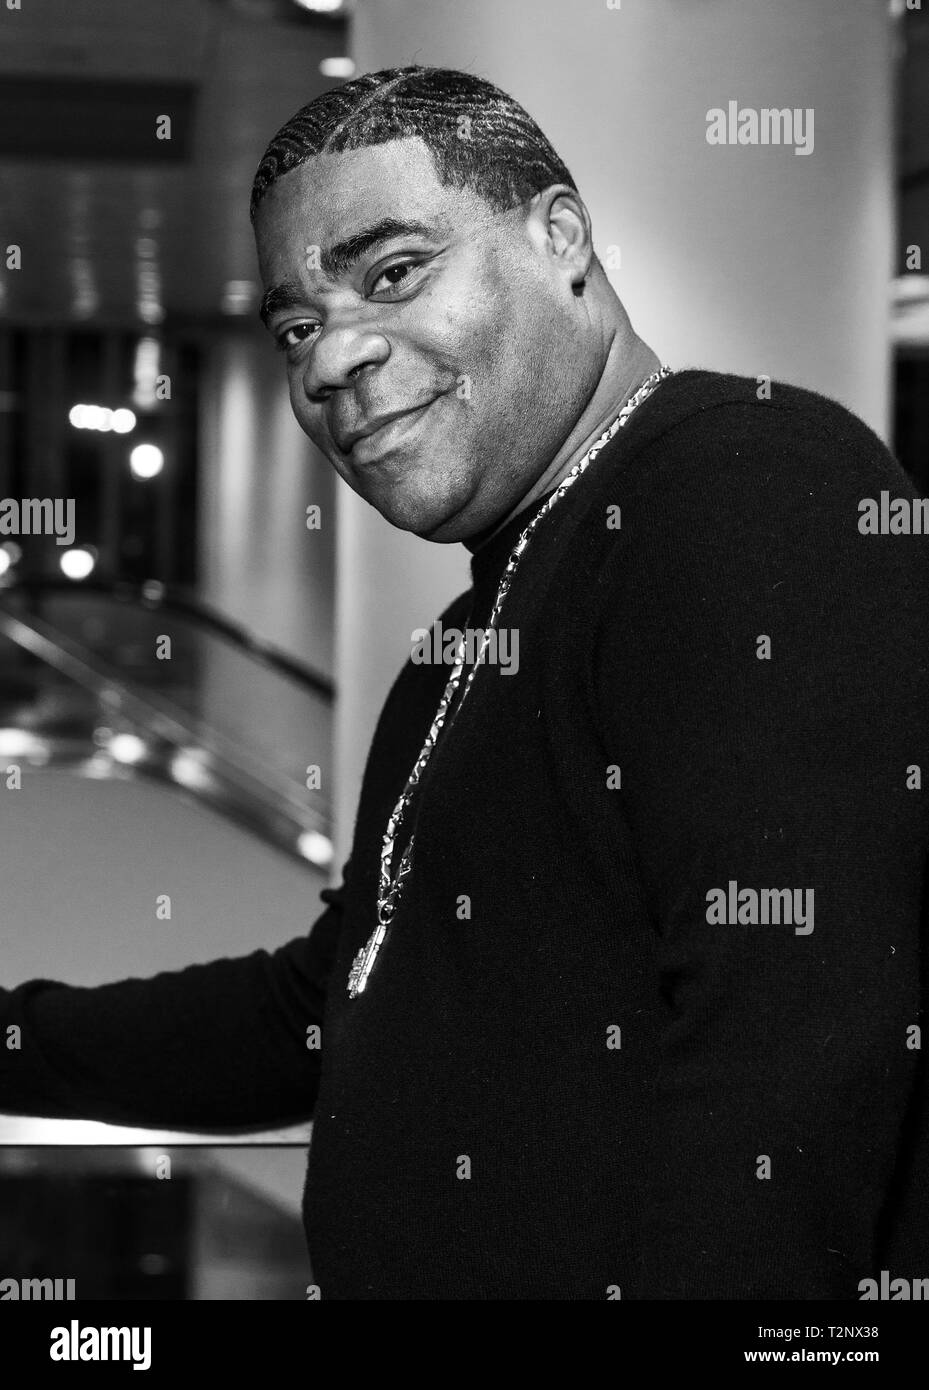 New York, United States. 02nd Apr, 2019. Tracy Morgan attends Garden of Laughs comedy benefit at Madison Square Garden Credit: Lev Radin/Pacific Press/Alamy Live News Stock Photo